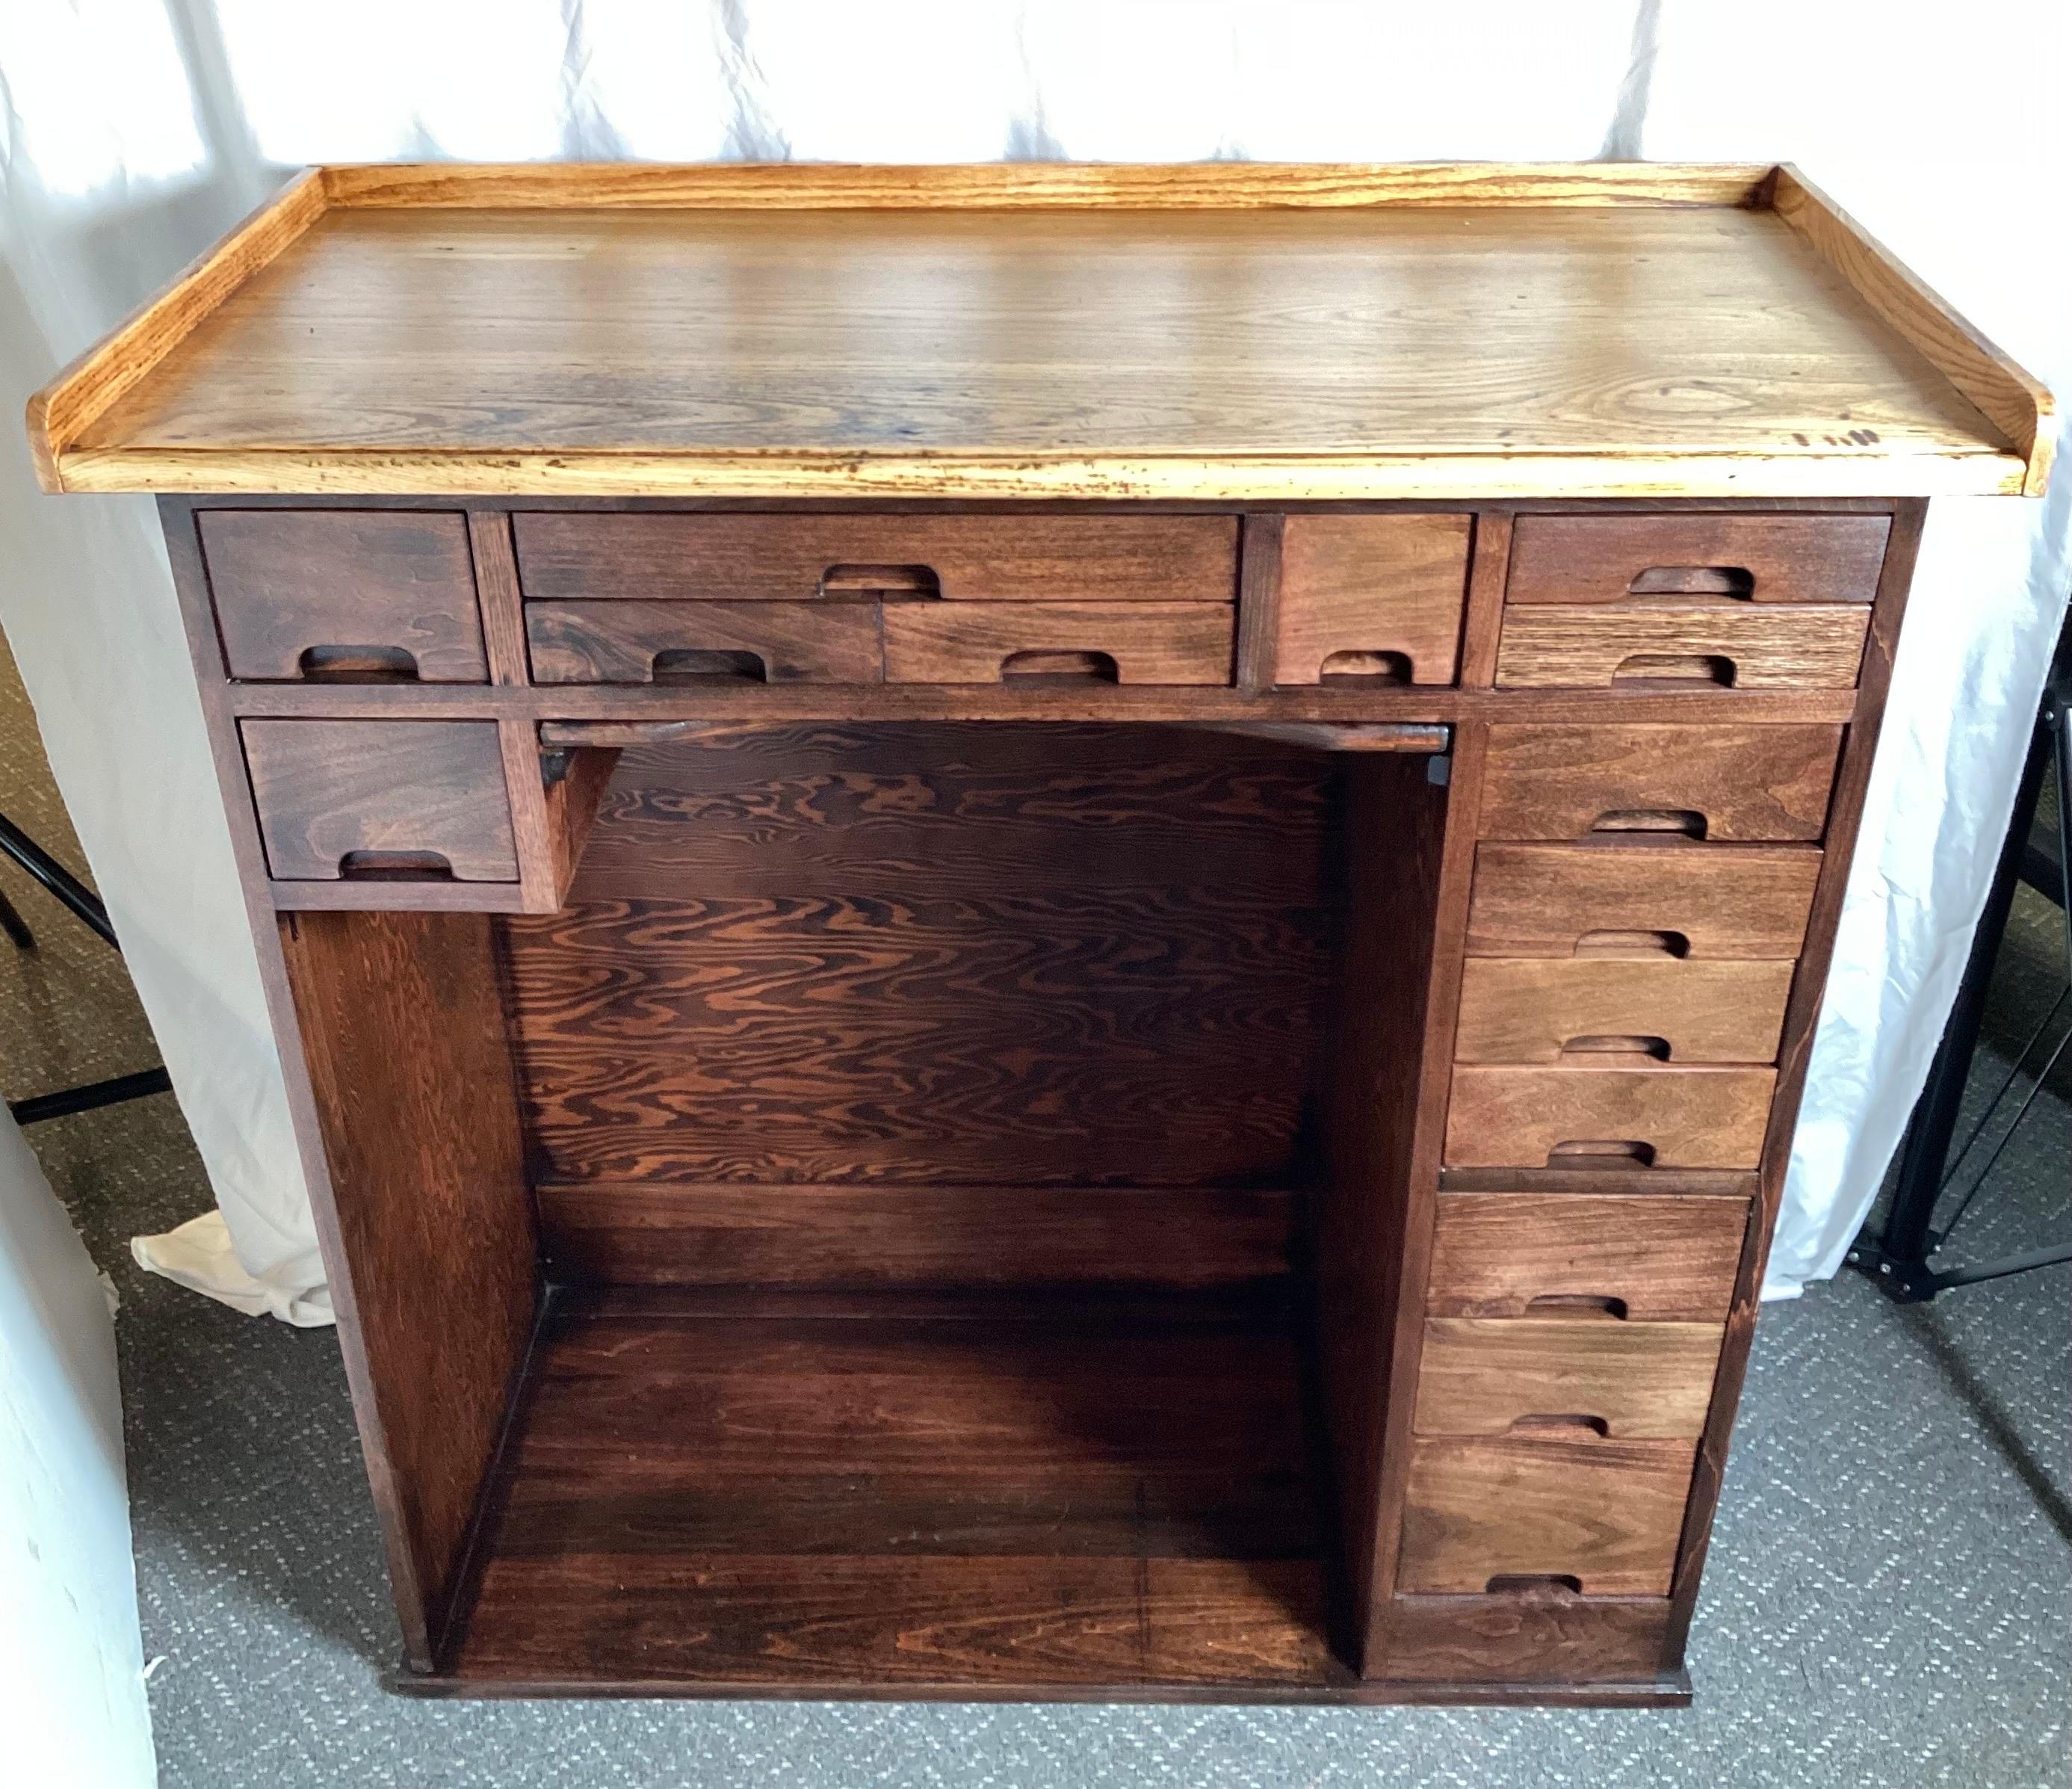 A beautifully made and well preserved Jewelers cabinet. The oak top with darker hardwood body with 15 drawers plus a catch tray. Great condition and very rare and unique.